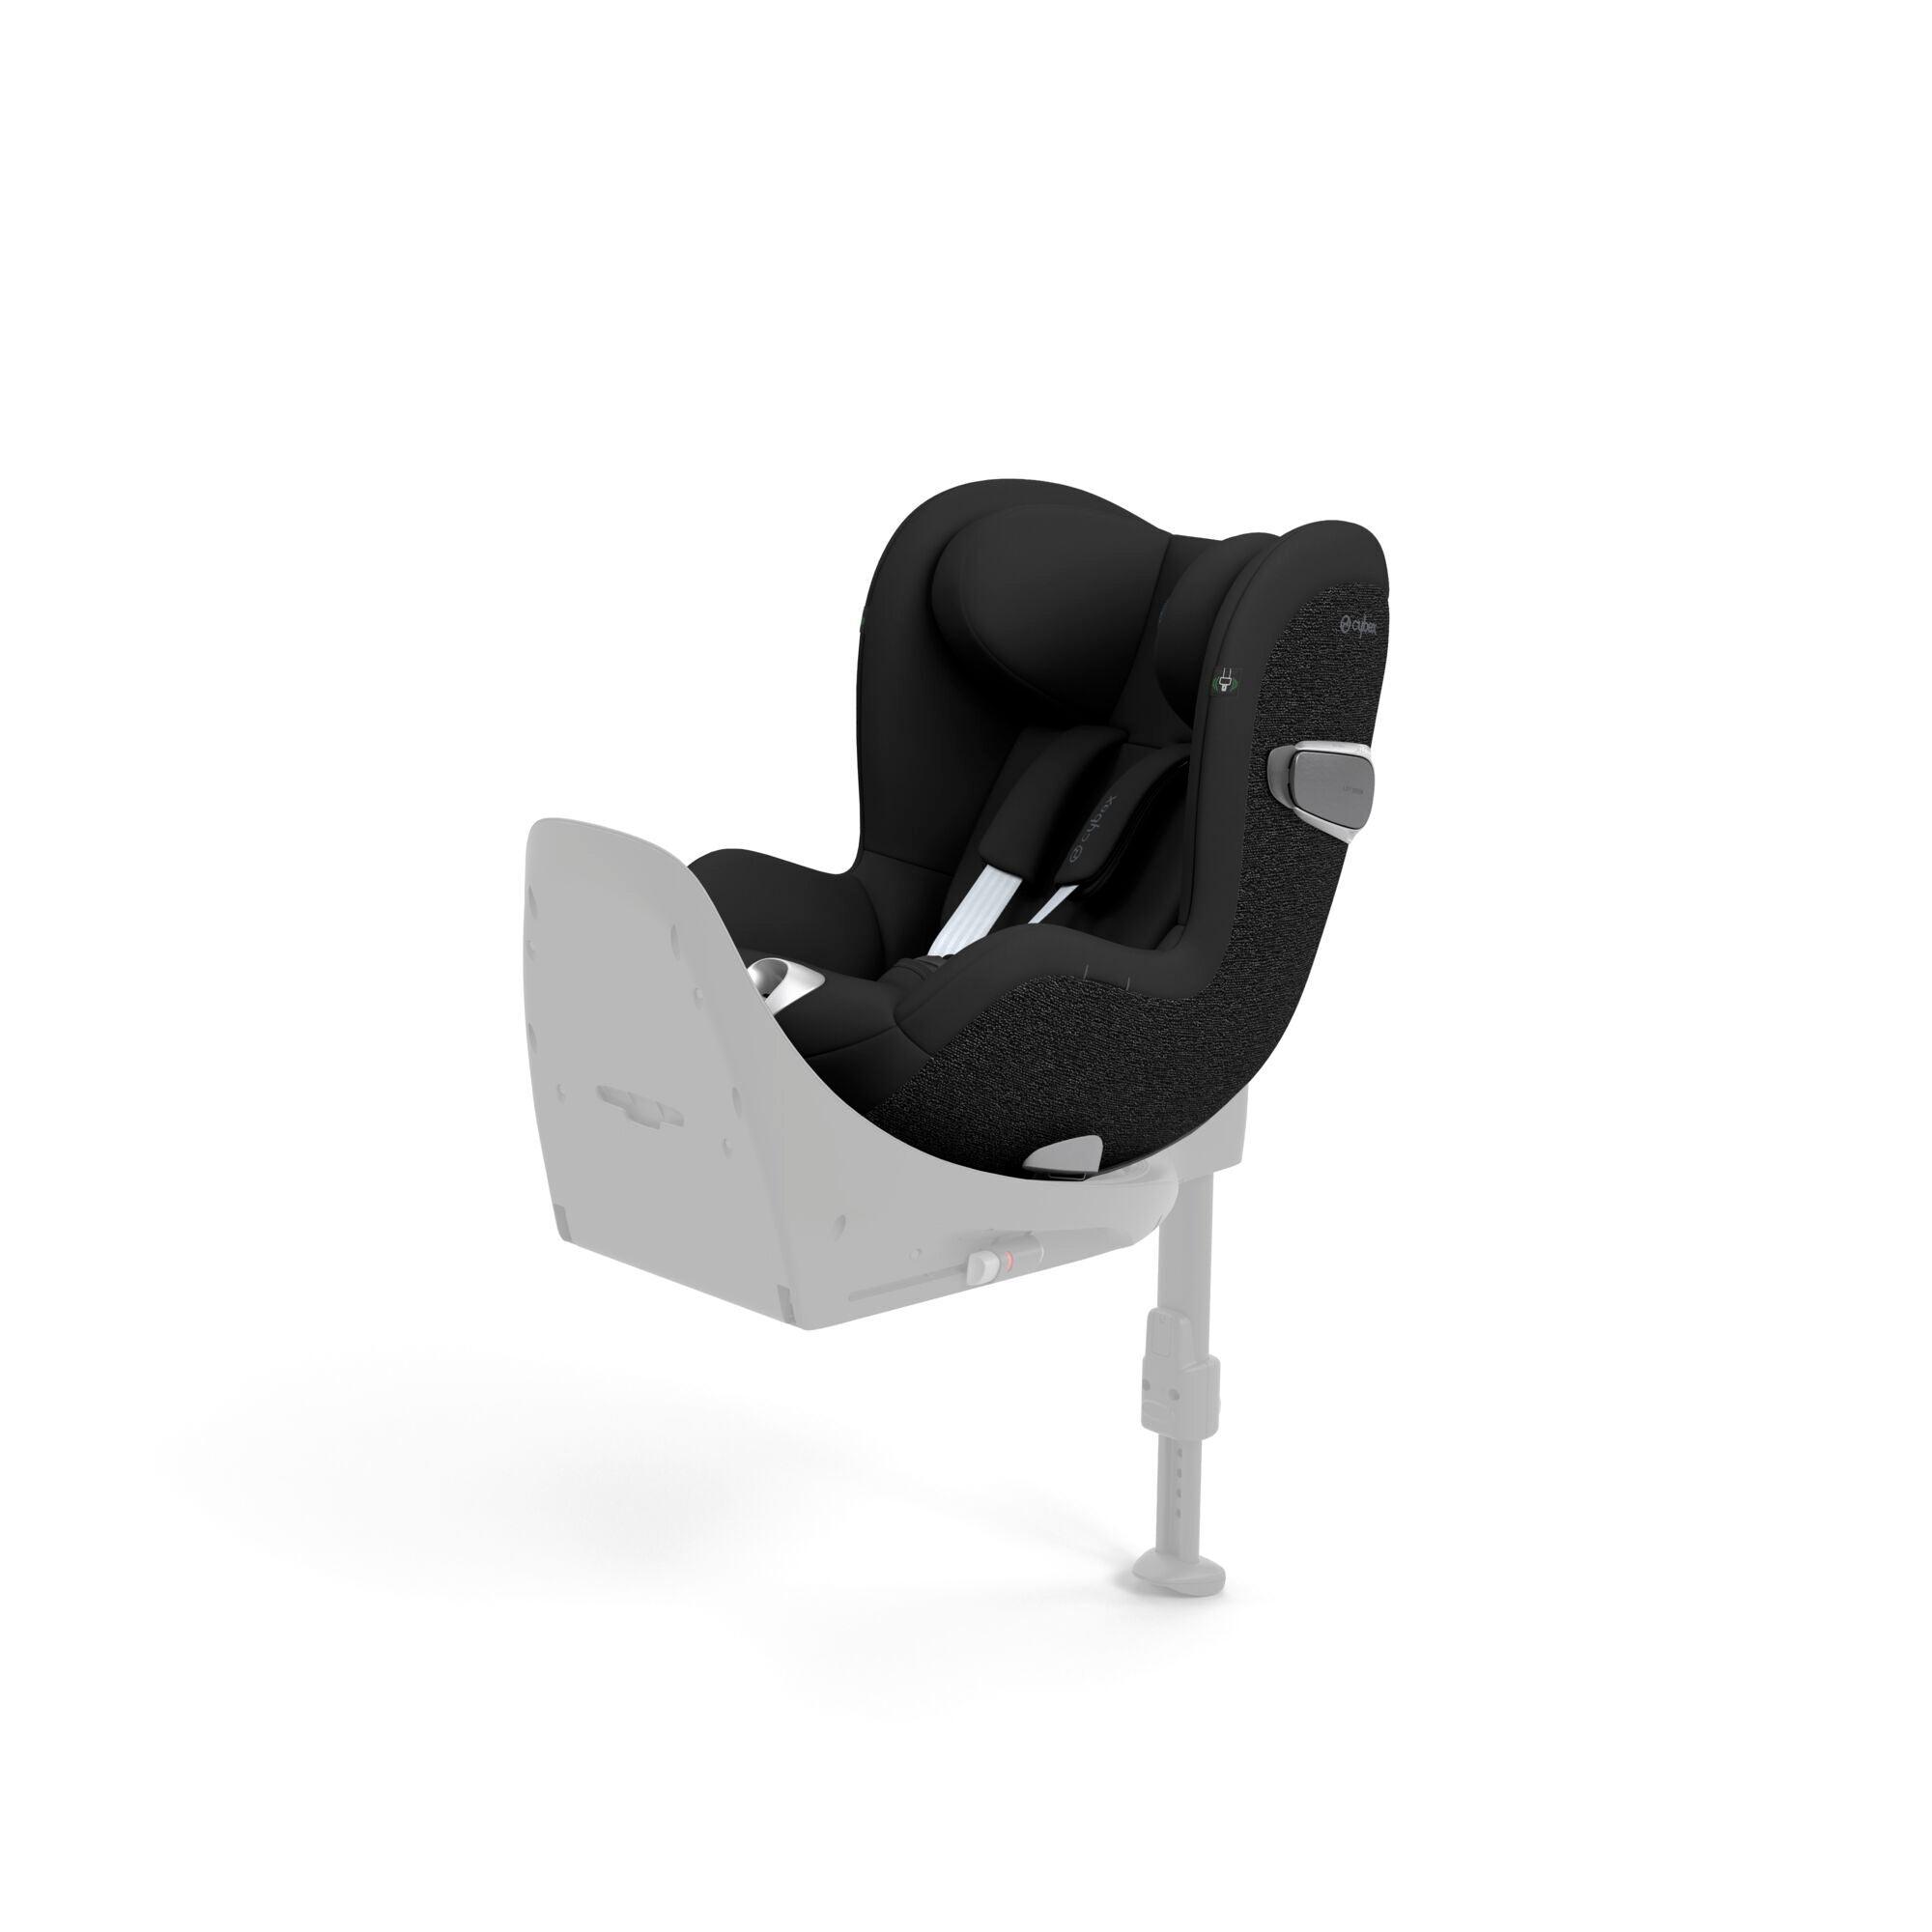 The CYBEX Sirona T i-Size car seat in sepia black, featuring an adjustable headrest and harness system, mounted on a secure base with an anti-rebound bar for safety.